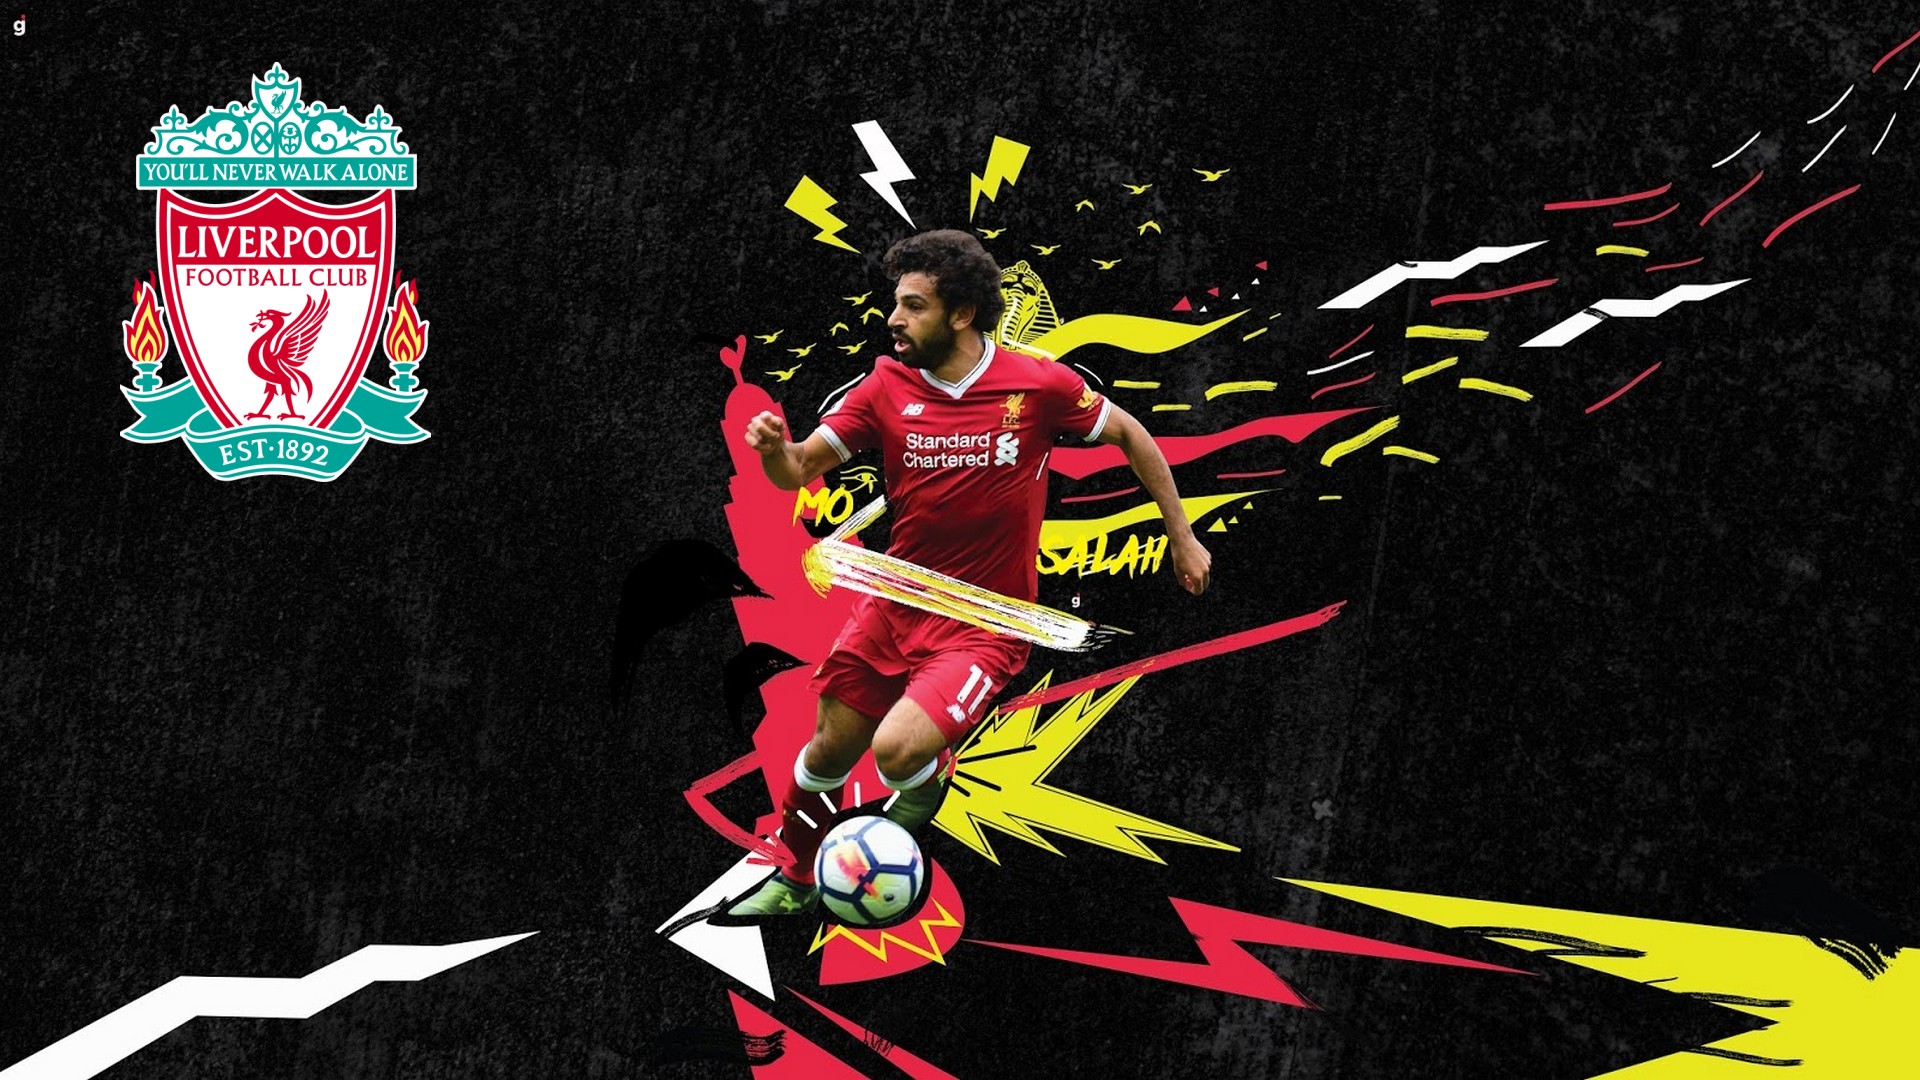 Liverpool Mohamed Salah Desktop Wallpaper with resolution 1920X1080 pixel. You can use this wallpaper as background for your desktop Computer Screensavers, Android or iPhone smartphones